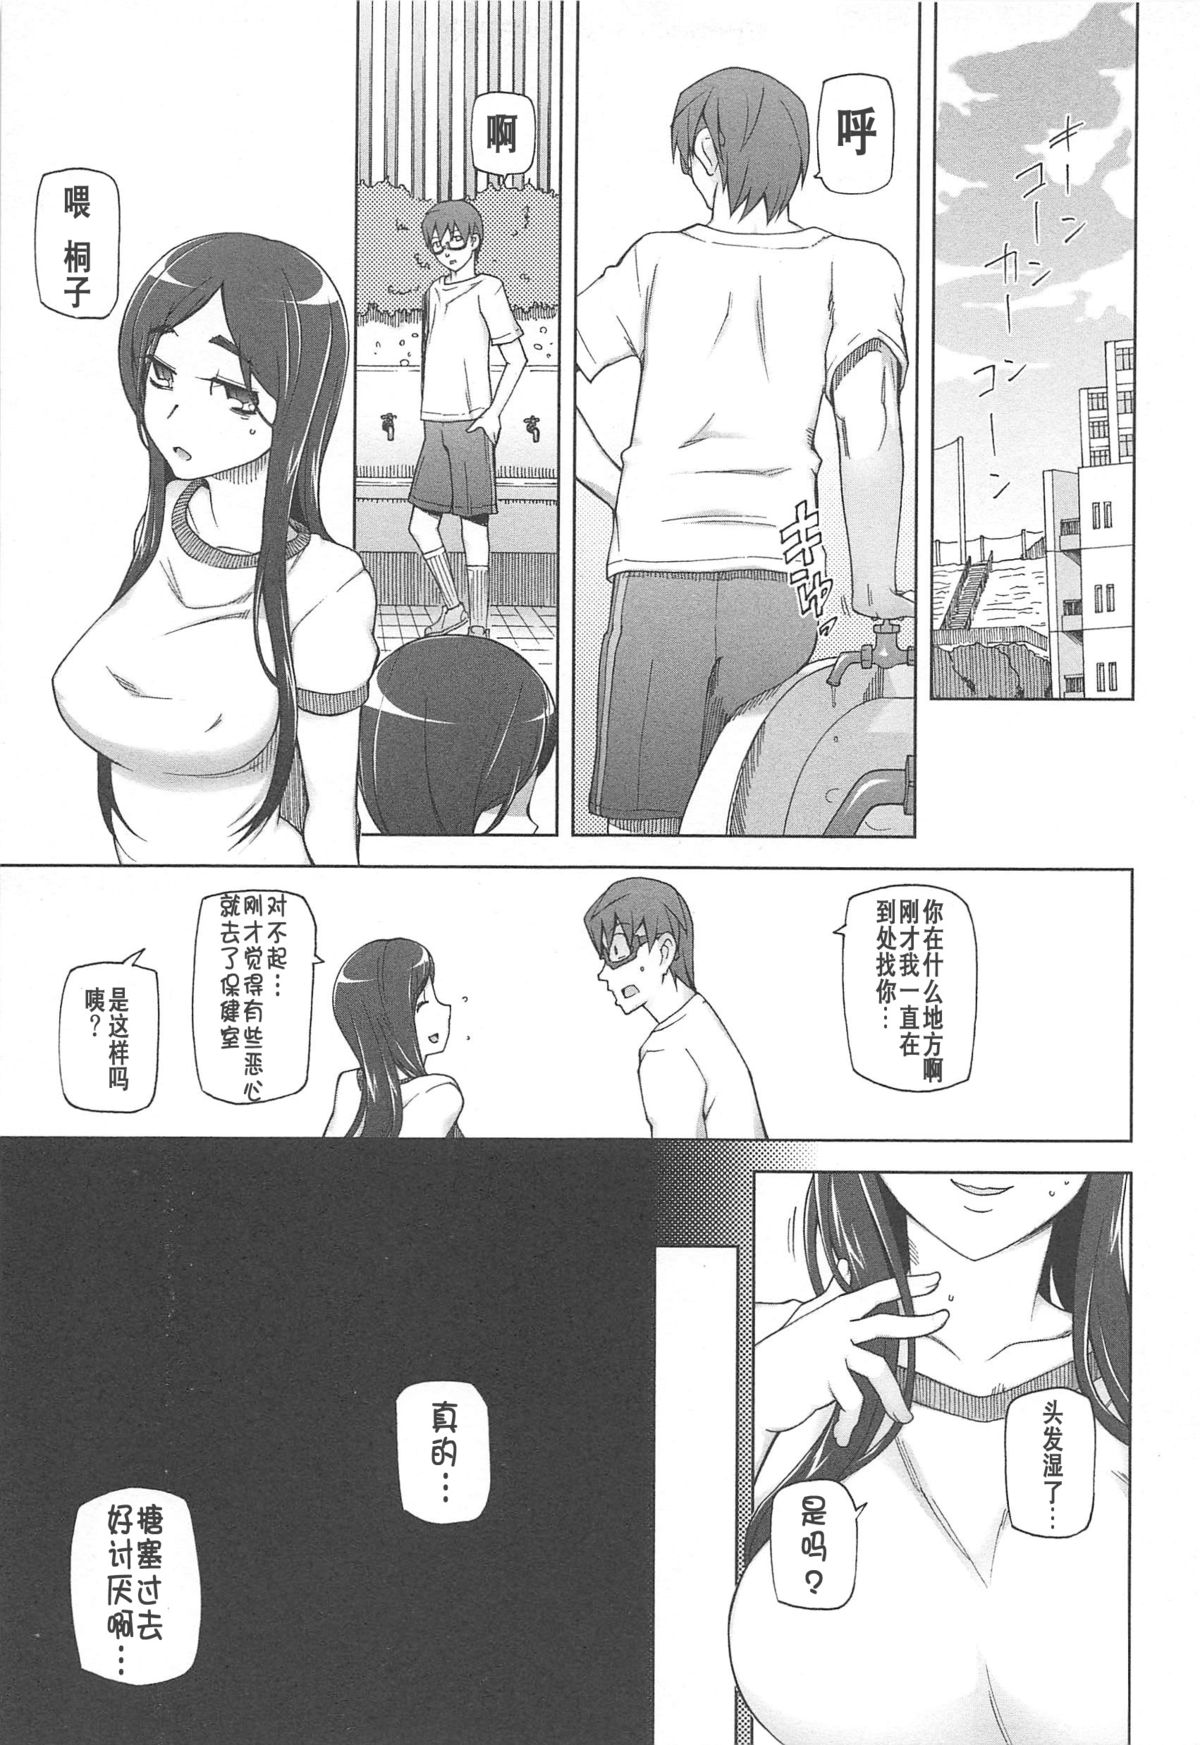 [Miito Shido] LUSTFUL BERRY Ch. 5 [Chinese] [joungpig个人汉化] page 19 full